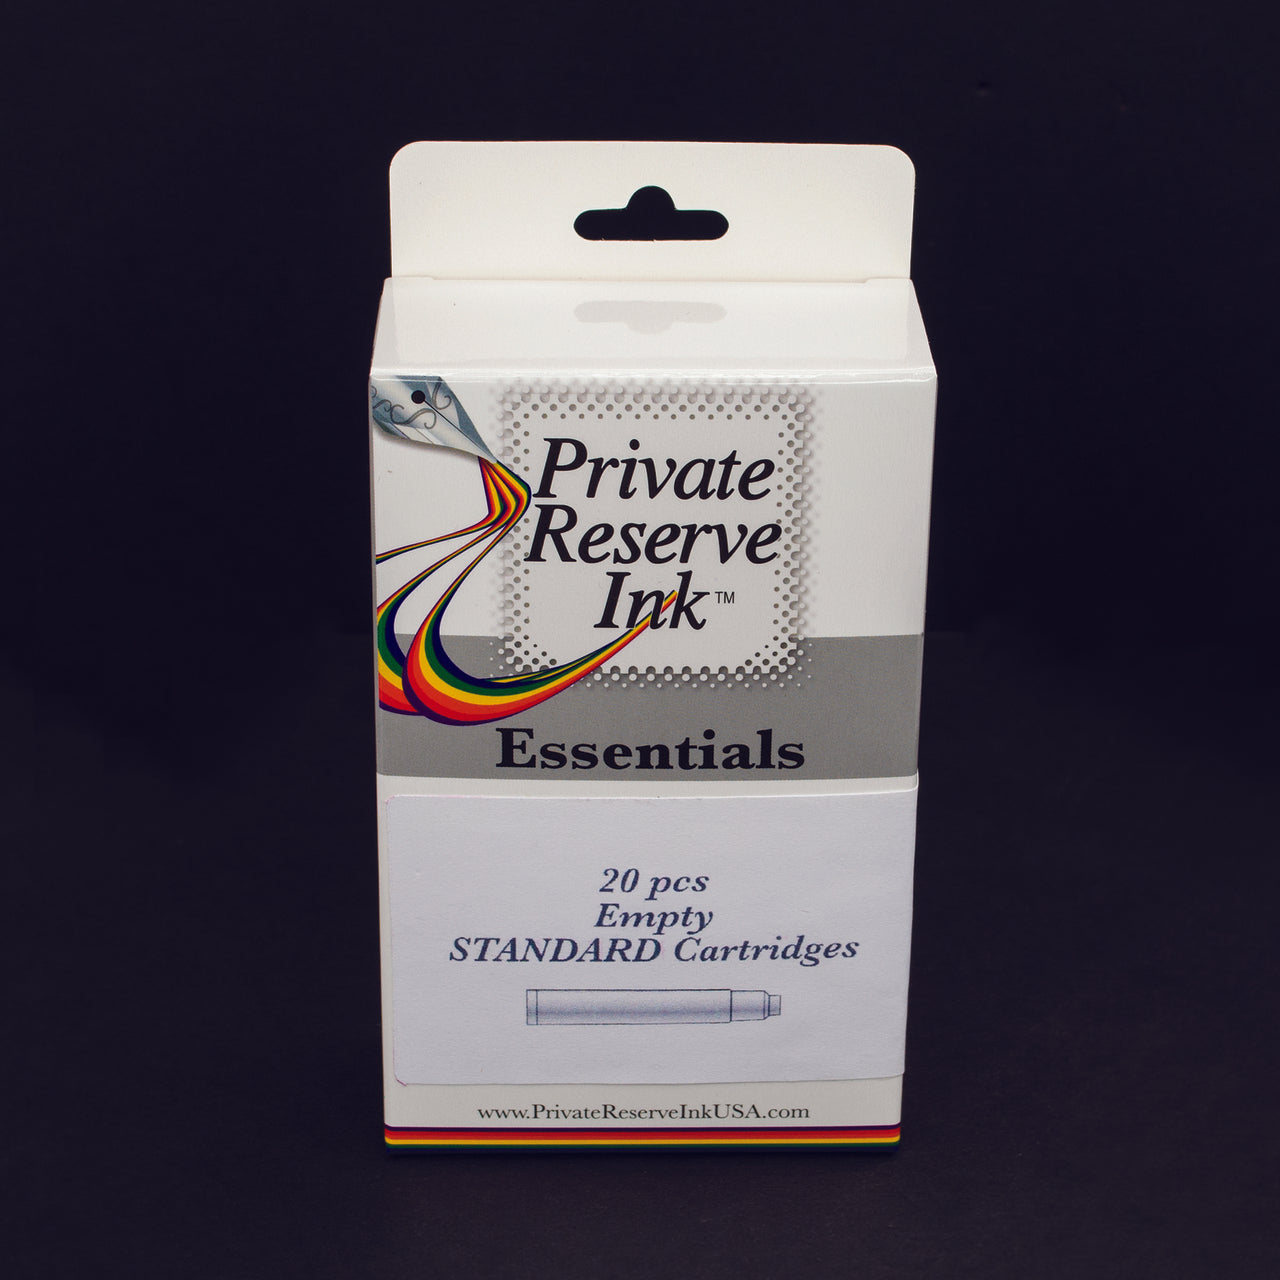 Private Reserve Ink Essentials 20 pc Empty Standard Ink Cartridges